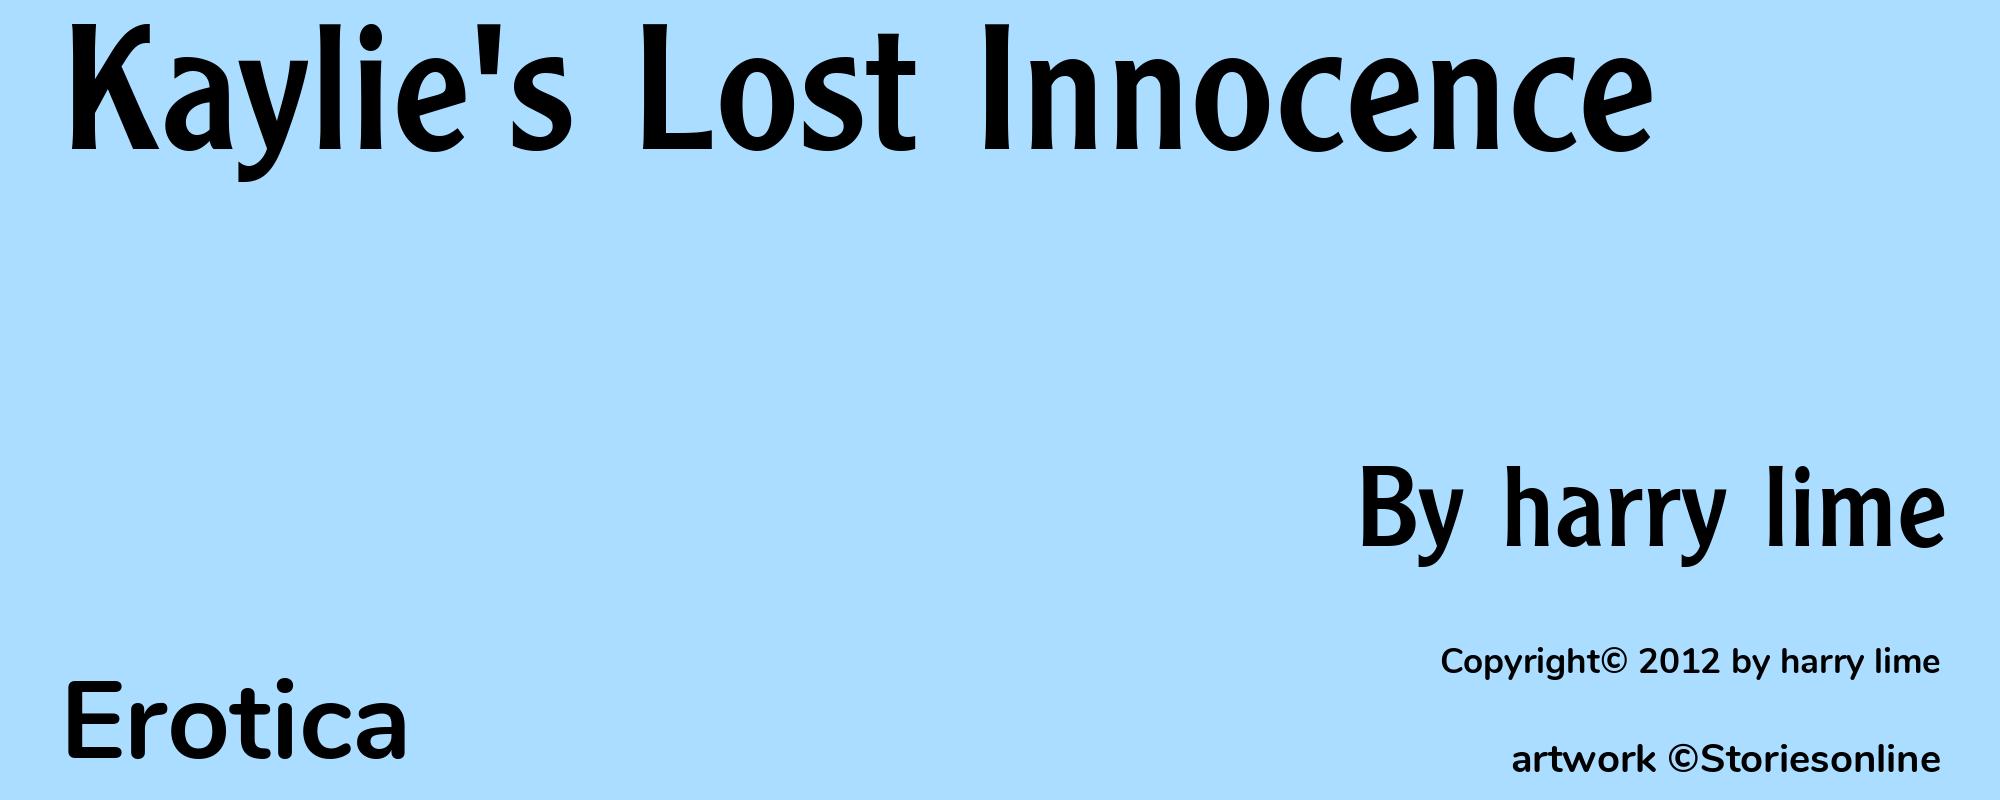 Kaylie's Lost Innocence - Cover